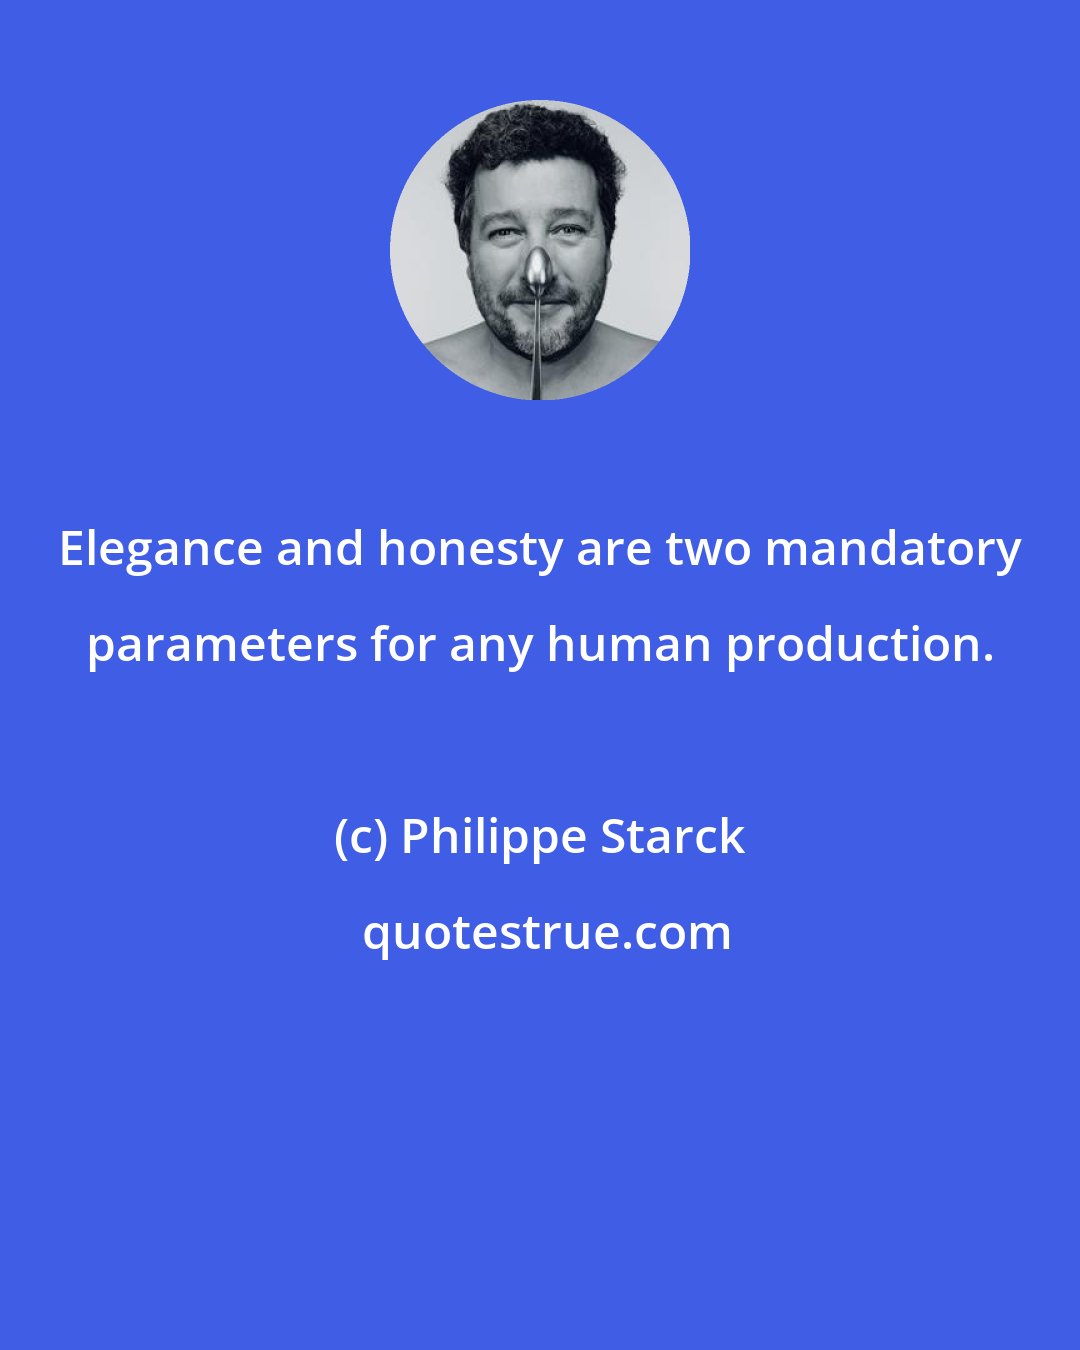 Philippe Starck: Elegance and honesty are two mandatory parameters for any human production.